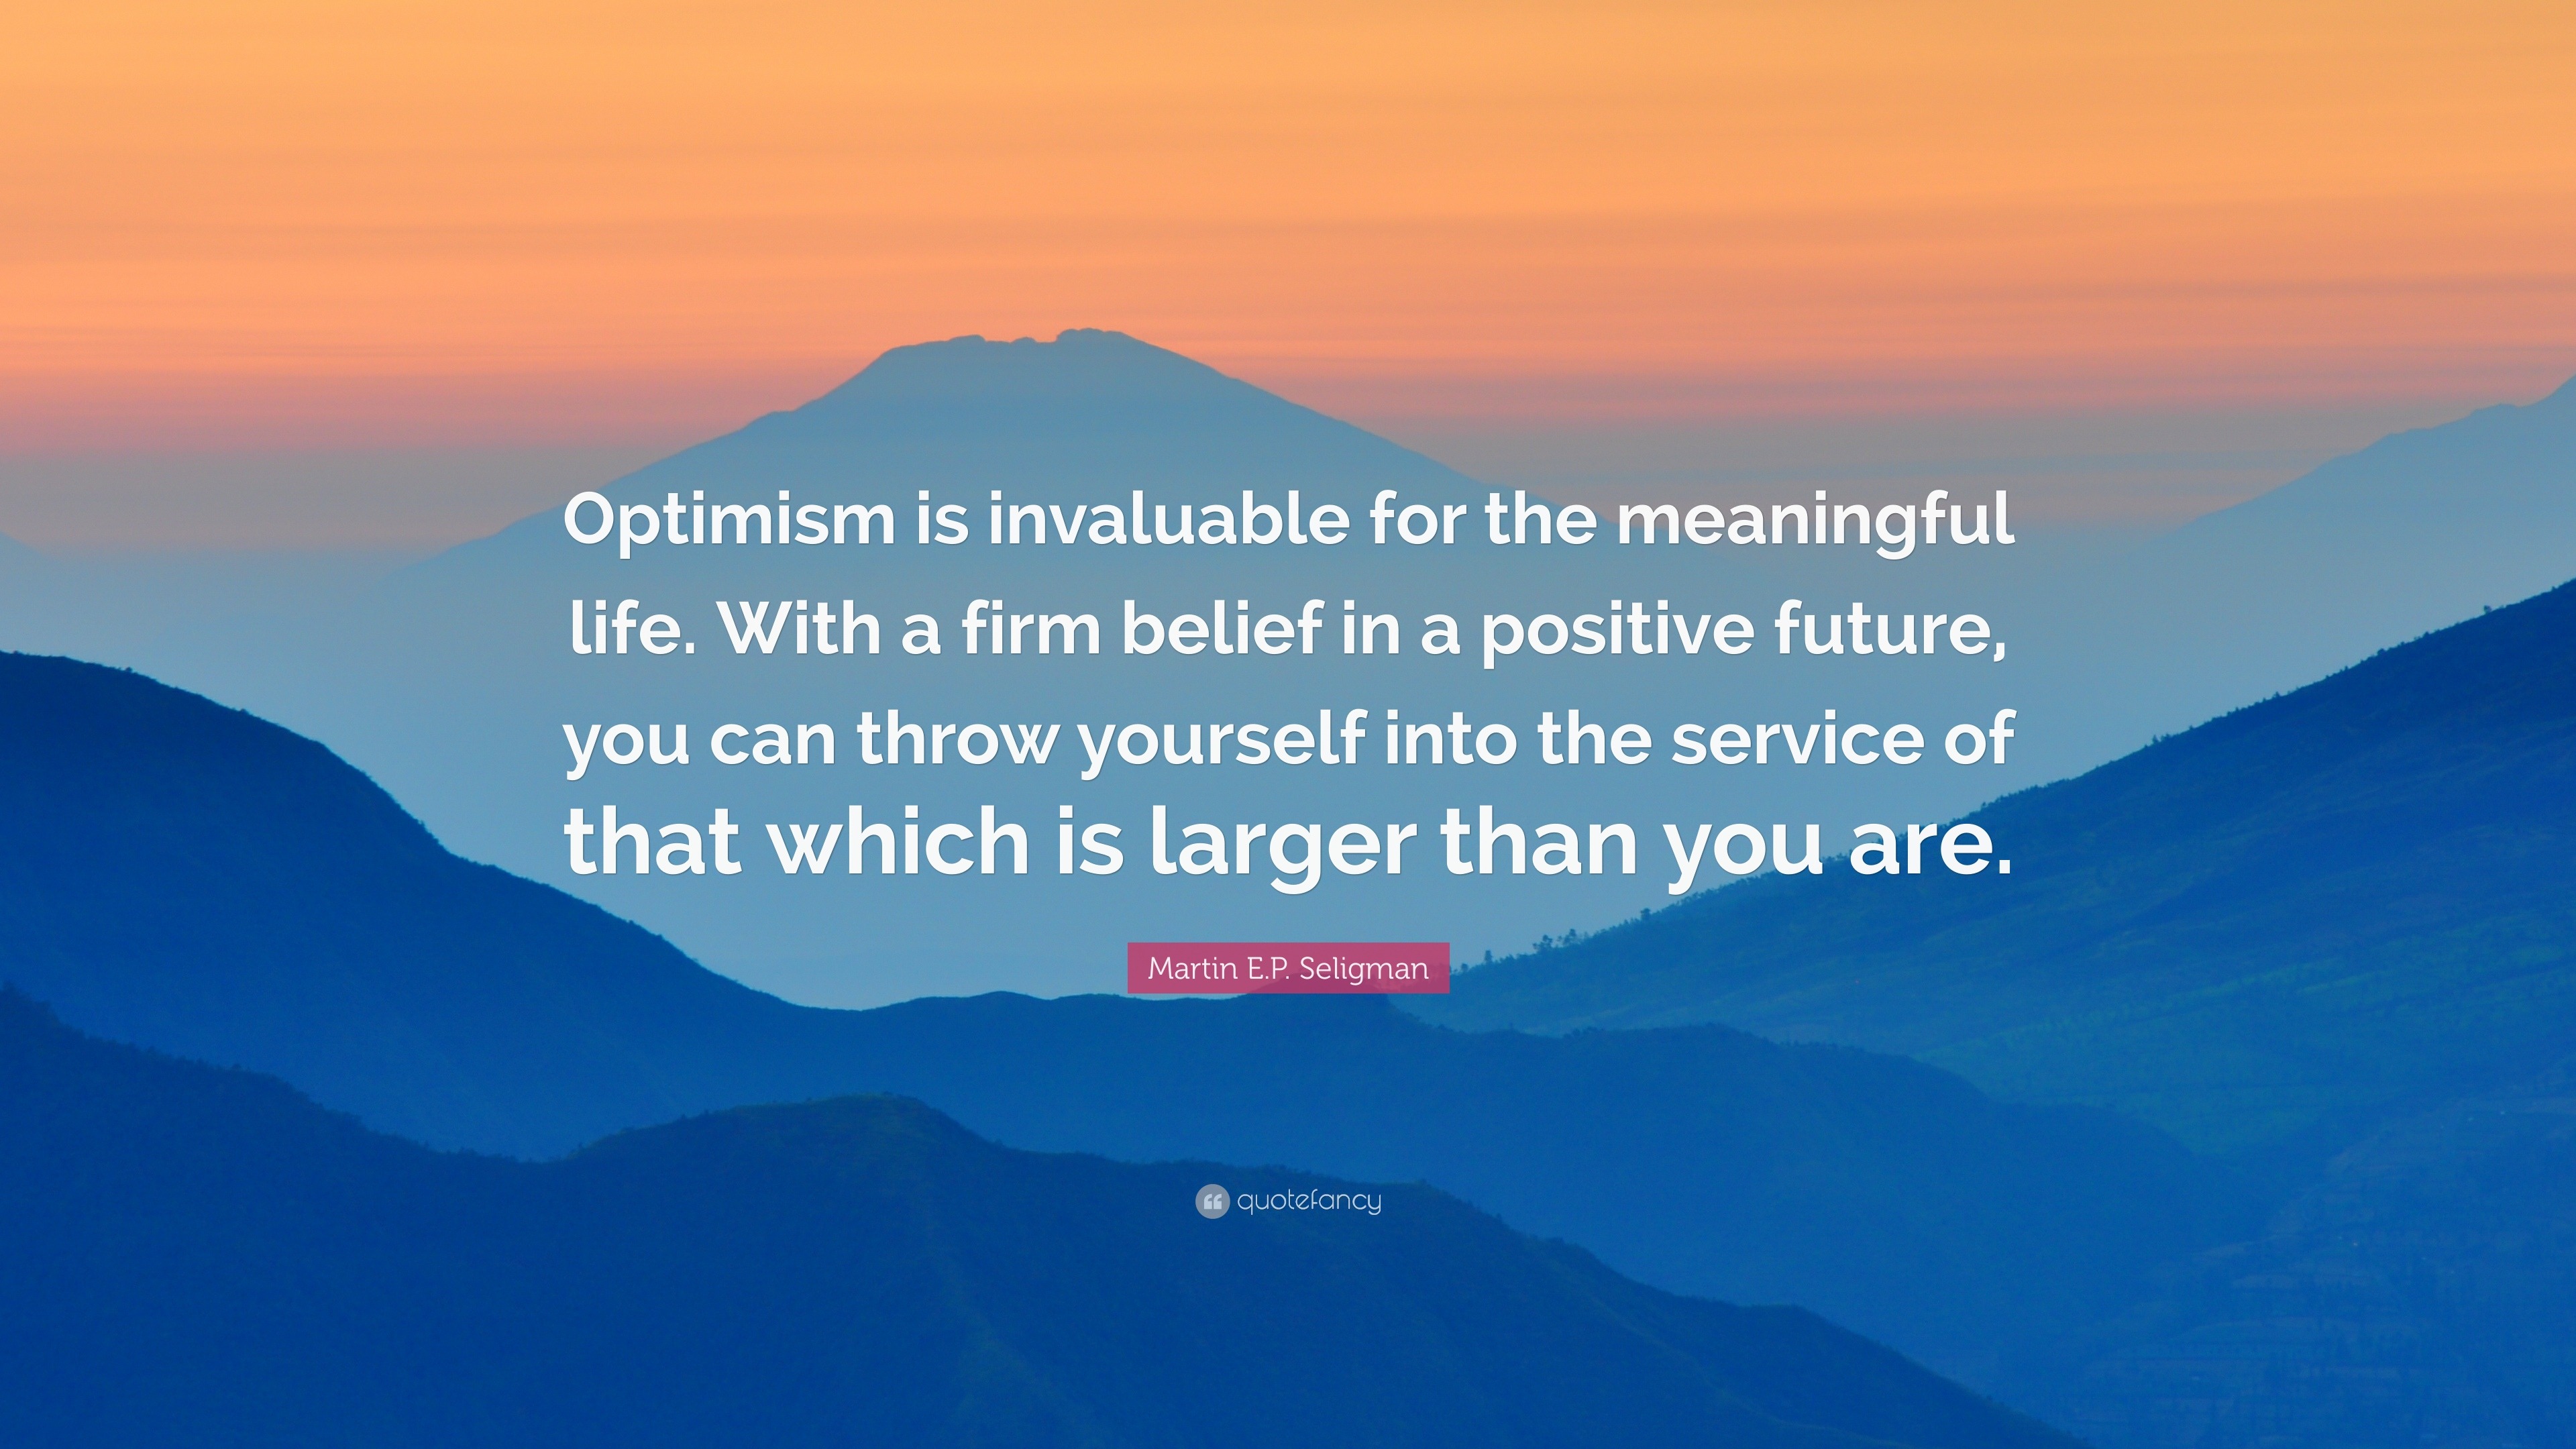 optimistic meaning